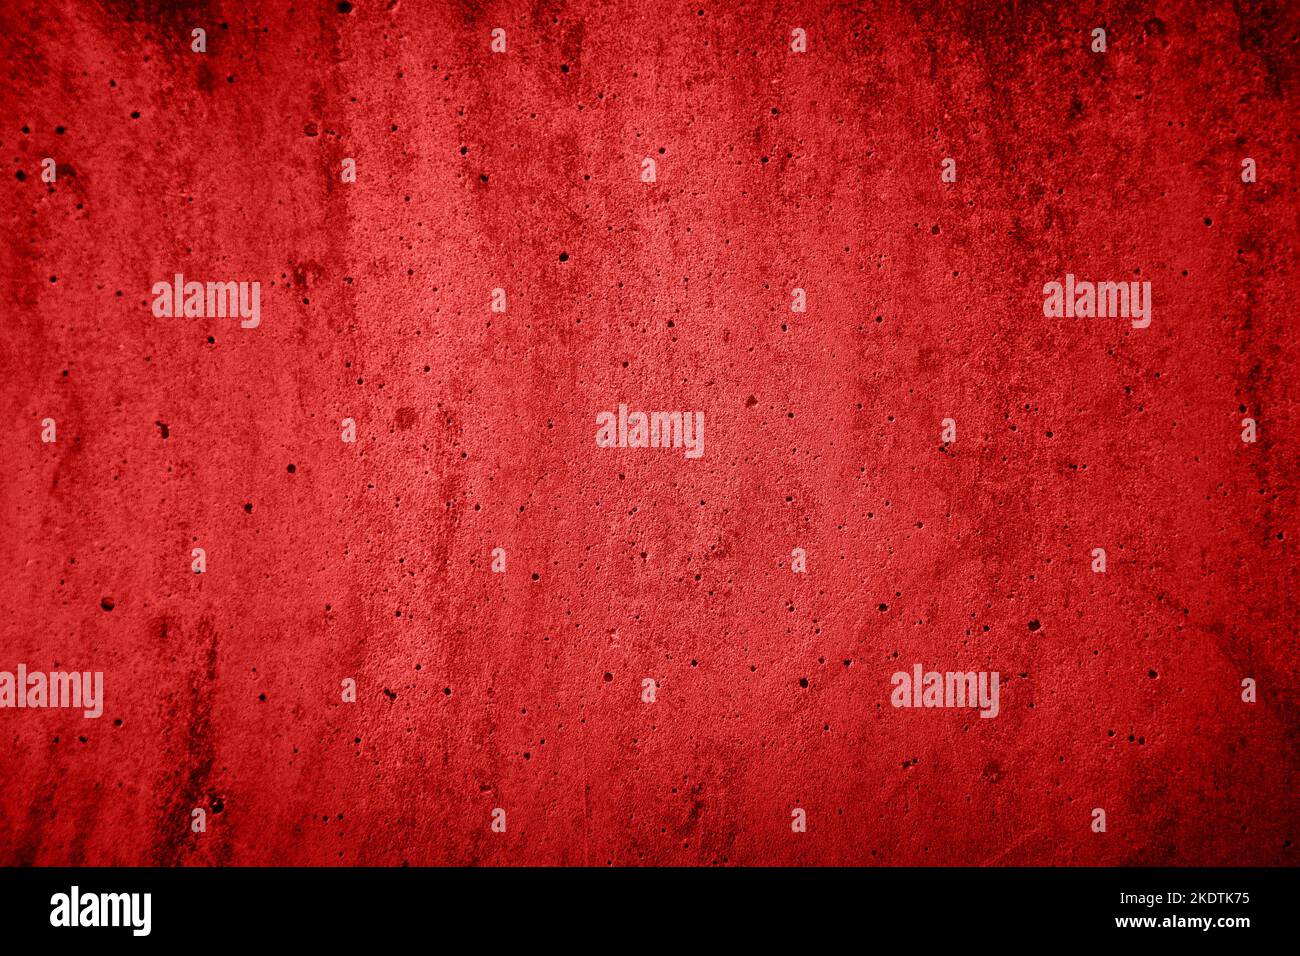 Red textured concrete wall background Stock Photo